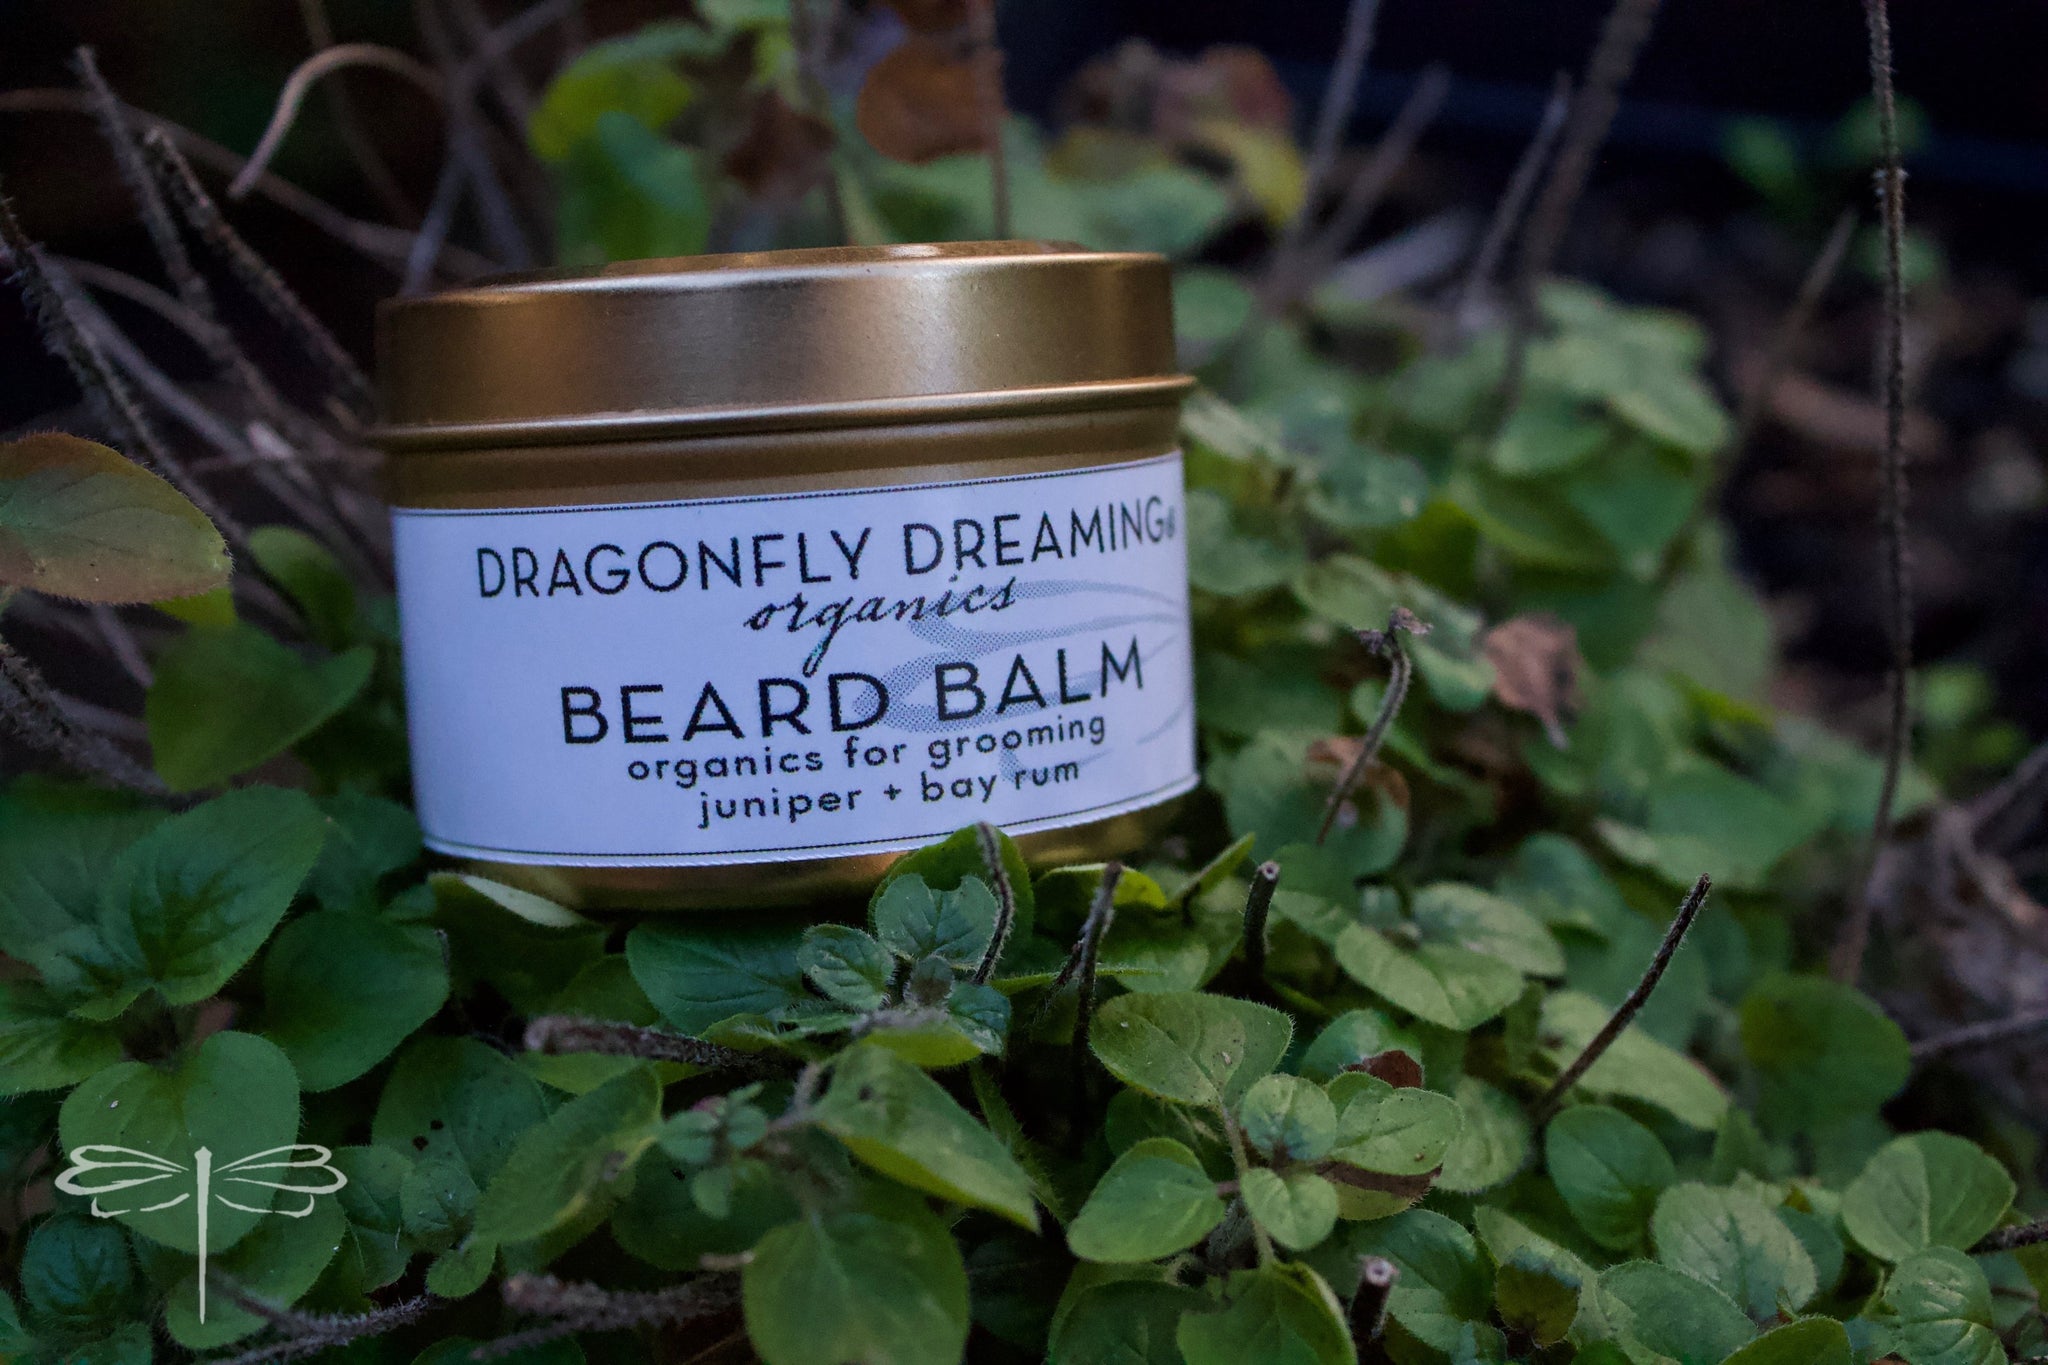 Dragonfly Dreaming® Juniper + Bay Rum Scented Beard Balm to calm and balm irritated skin